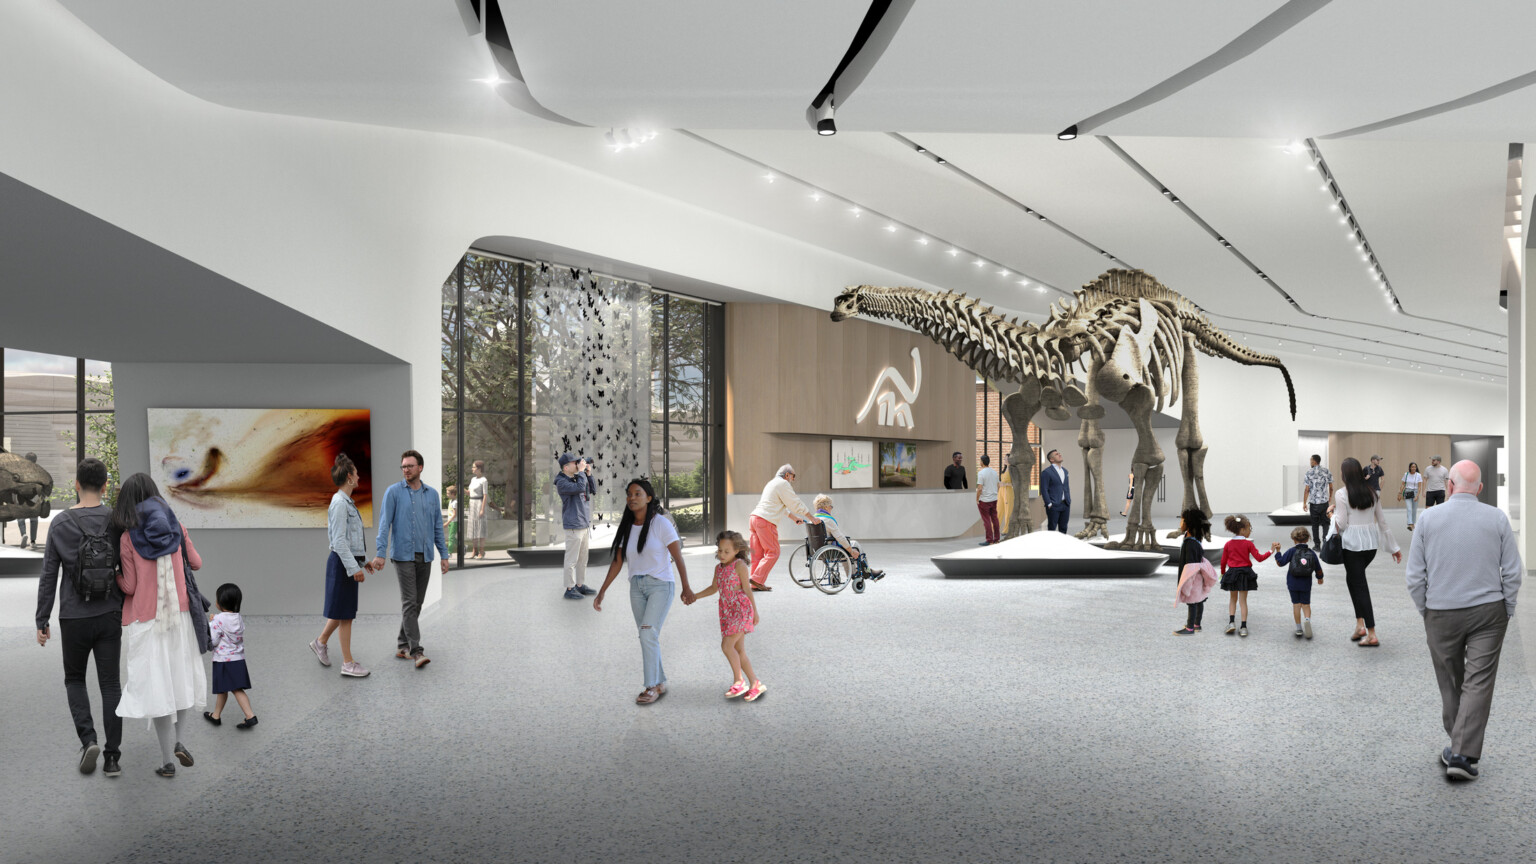 The Cleveland Museum of Natural History Centennial Transformation project will feature new, renovated, and reorganized exhibit spaces